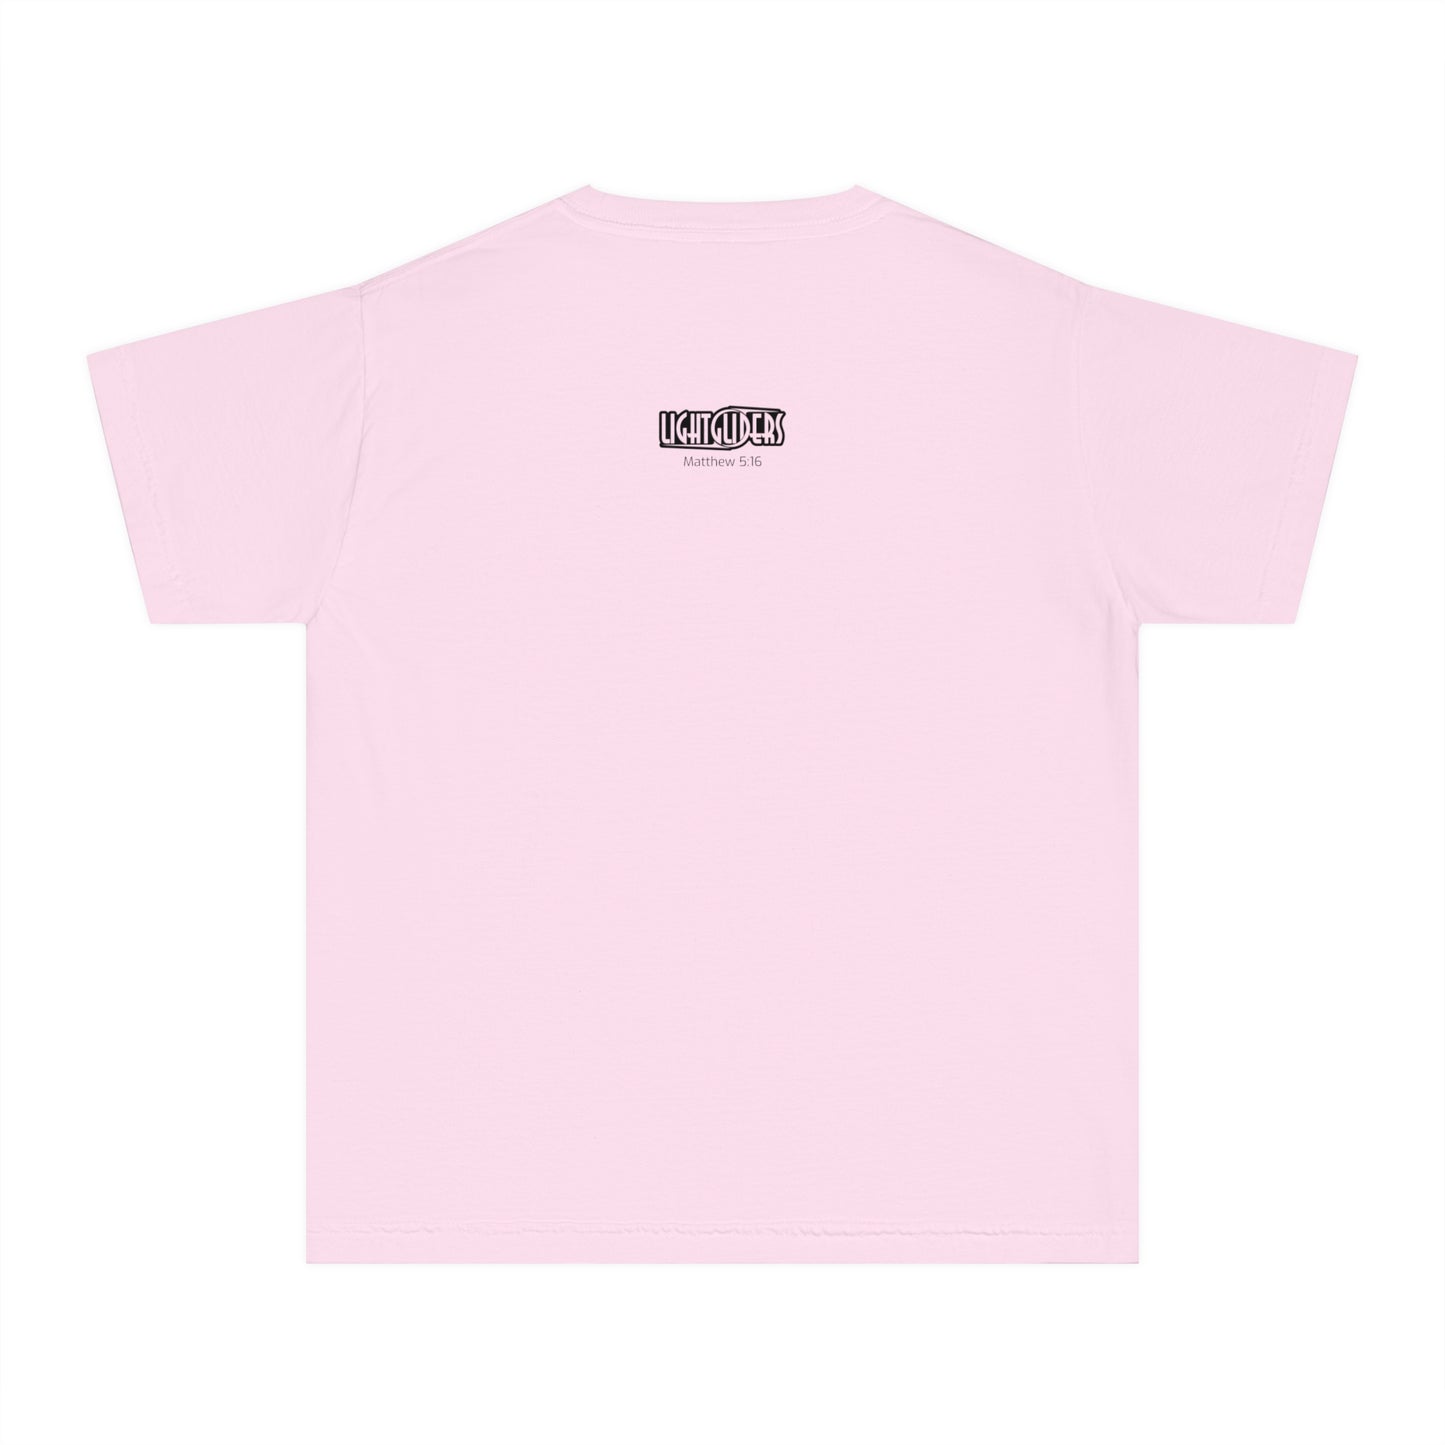 Lightglider Comfort Colors Youth Tee